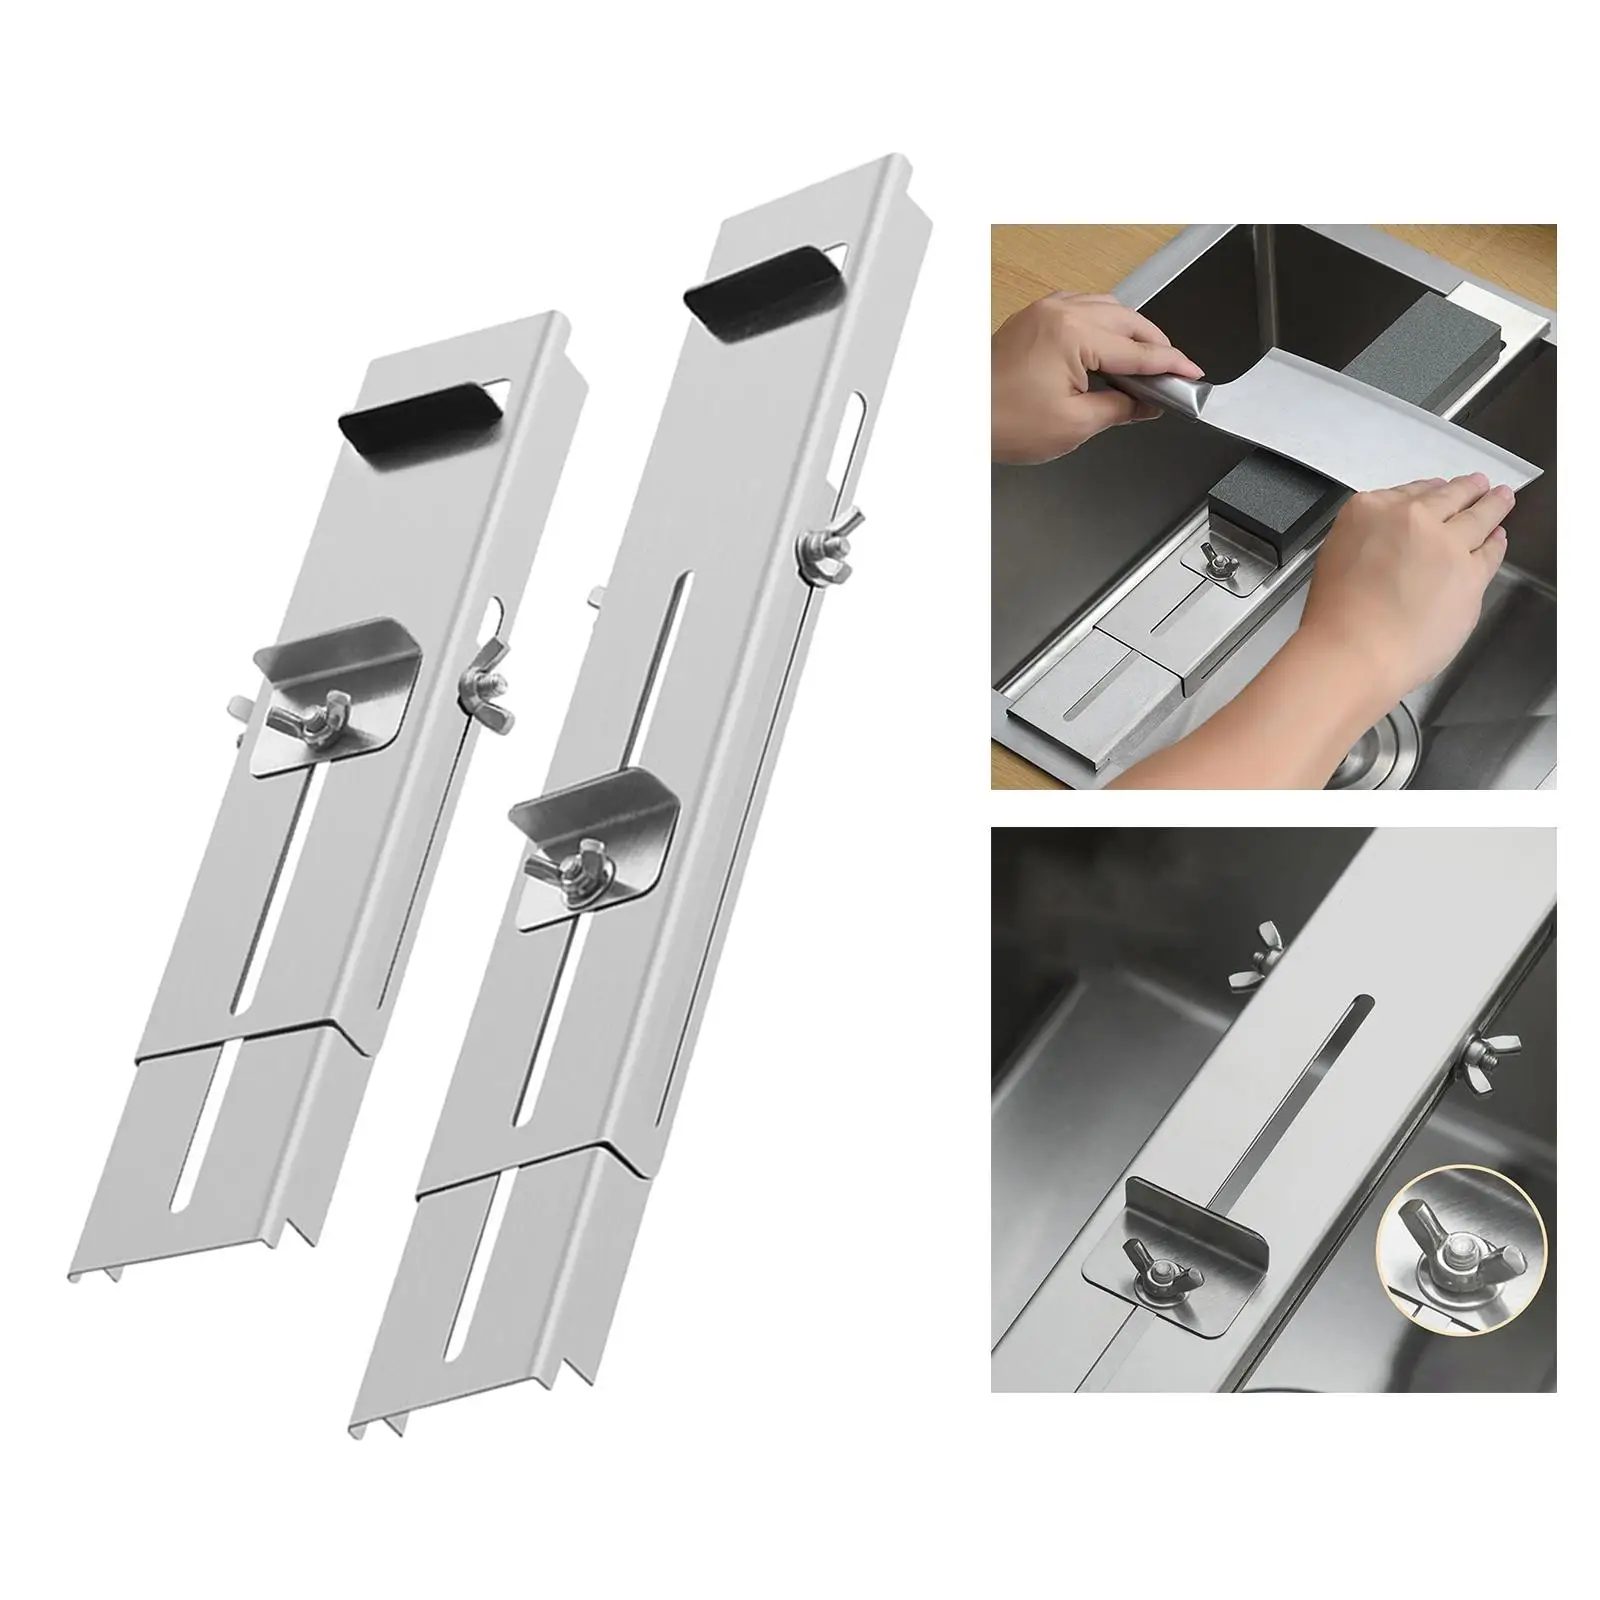 Professional Sharpening Stone Holder Adjustable Stainless Steel Sink Rack Retractable Expandable for Diamond Stones Grinding